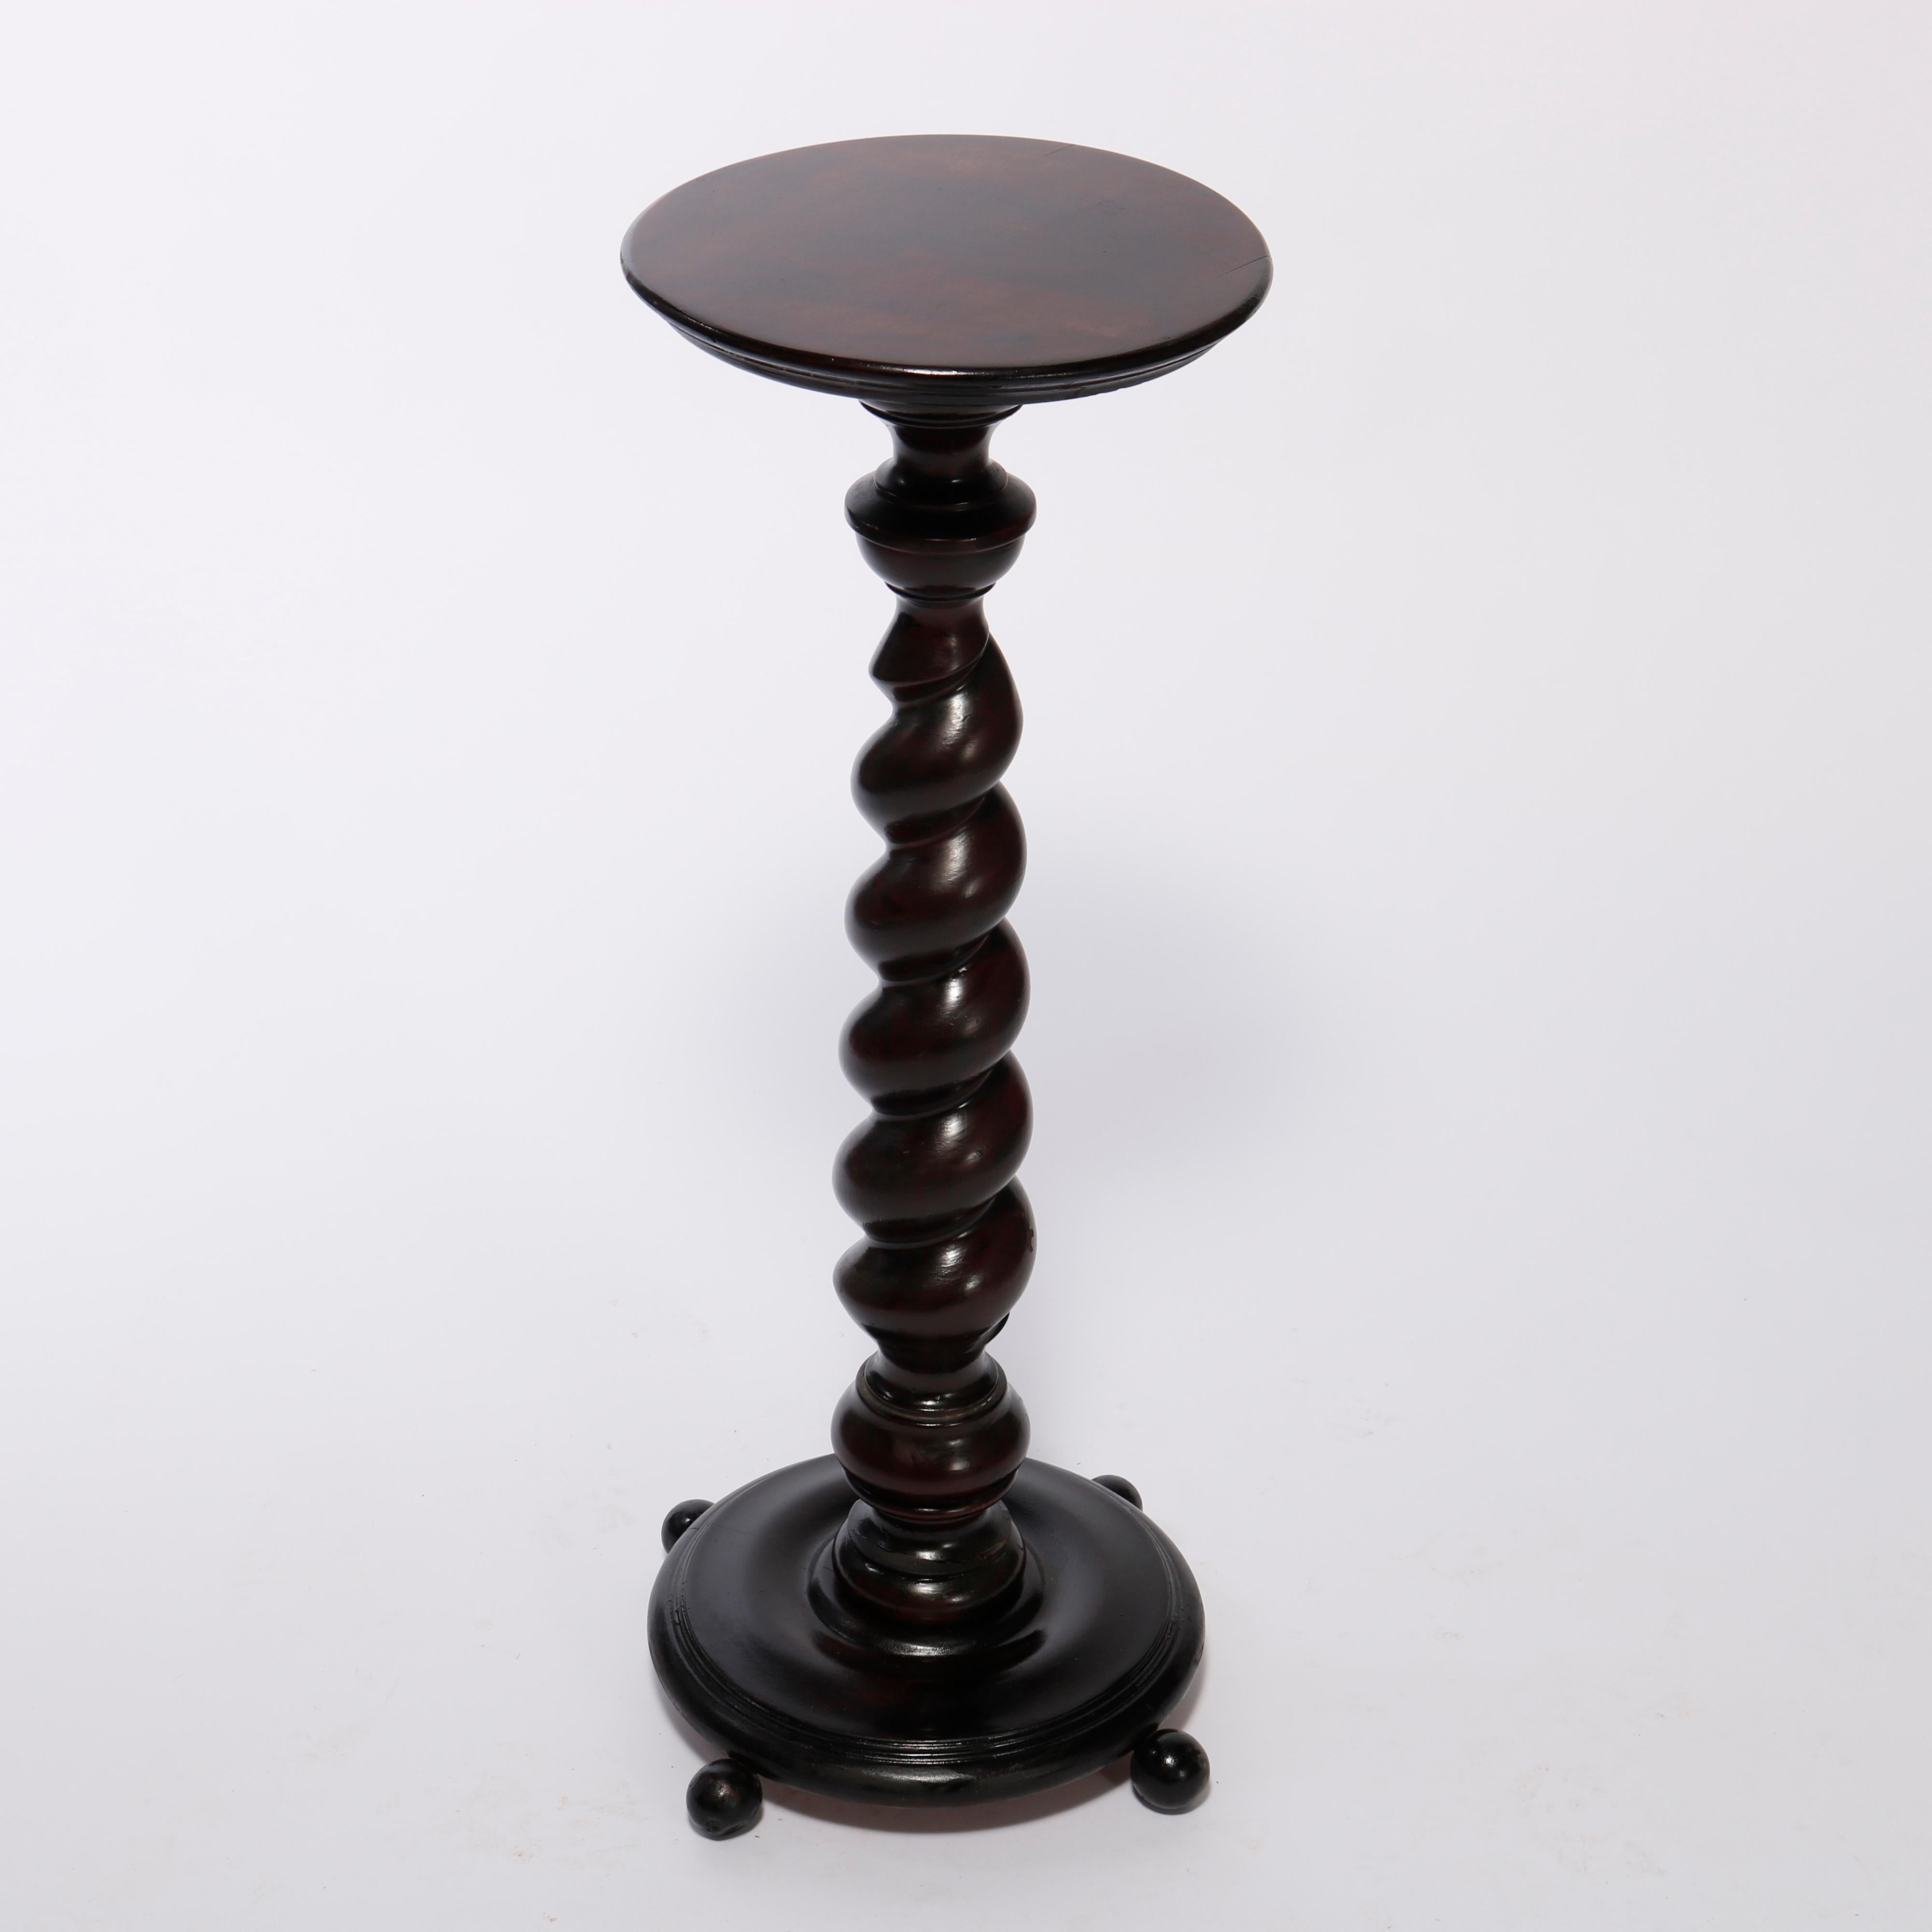 An antique Classical sculpture pedestal offers carved mahogany construction with circular display over rope twist column and seated on base with ball feet, c1910

Measures - 36.25''H x 15.75''W x 15.75''D.

Catalogue Note: Ask about DISCOUNTED